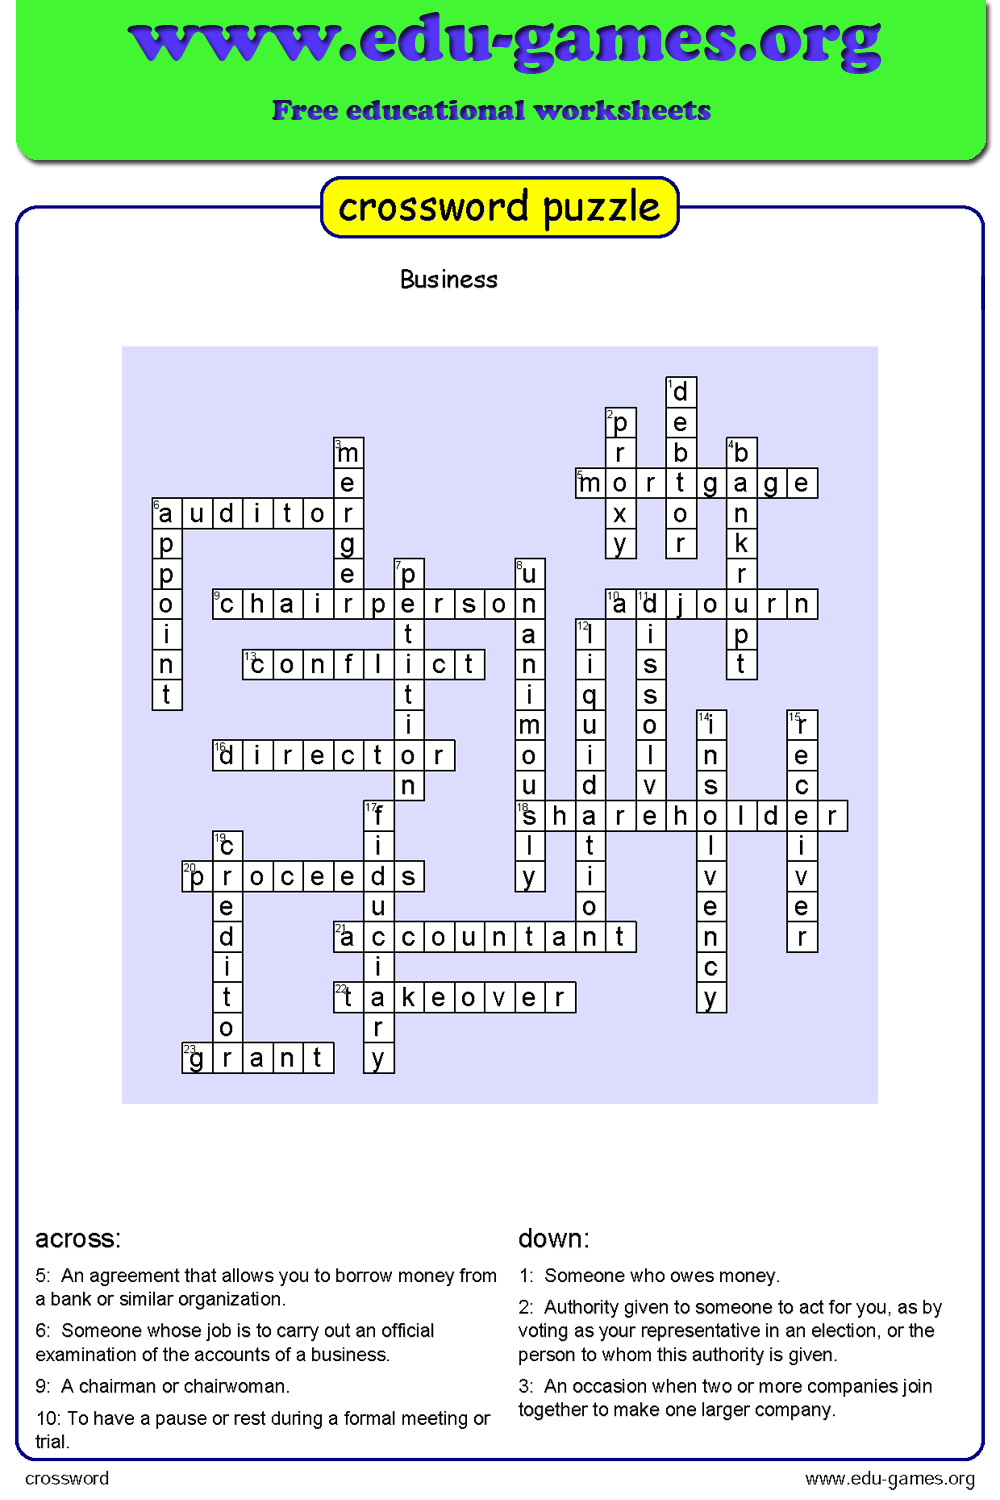 Free Crossword Maker For Kids - The Puzzle Maker Site - Crossword Maker Free And Printable